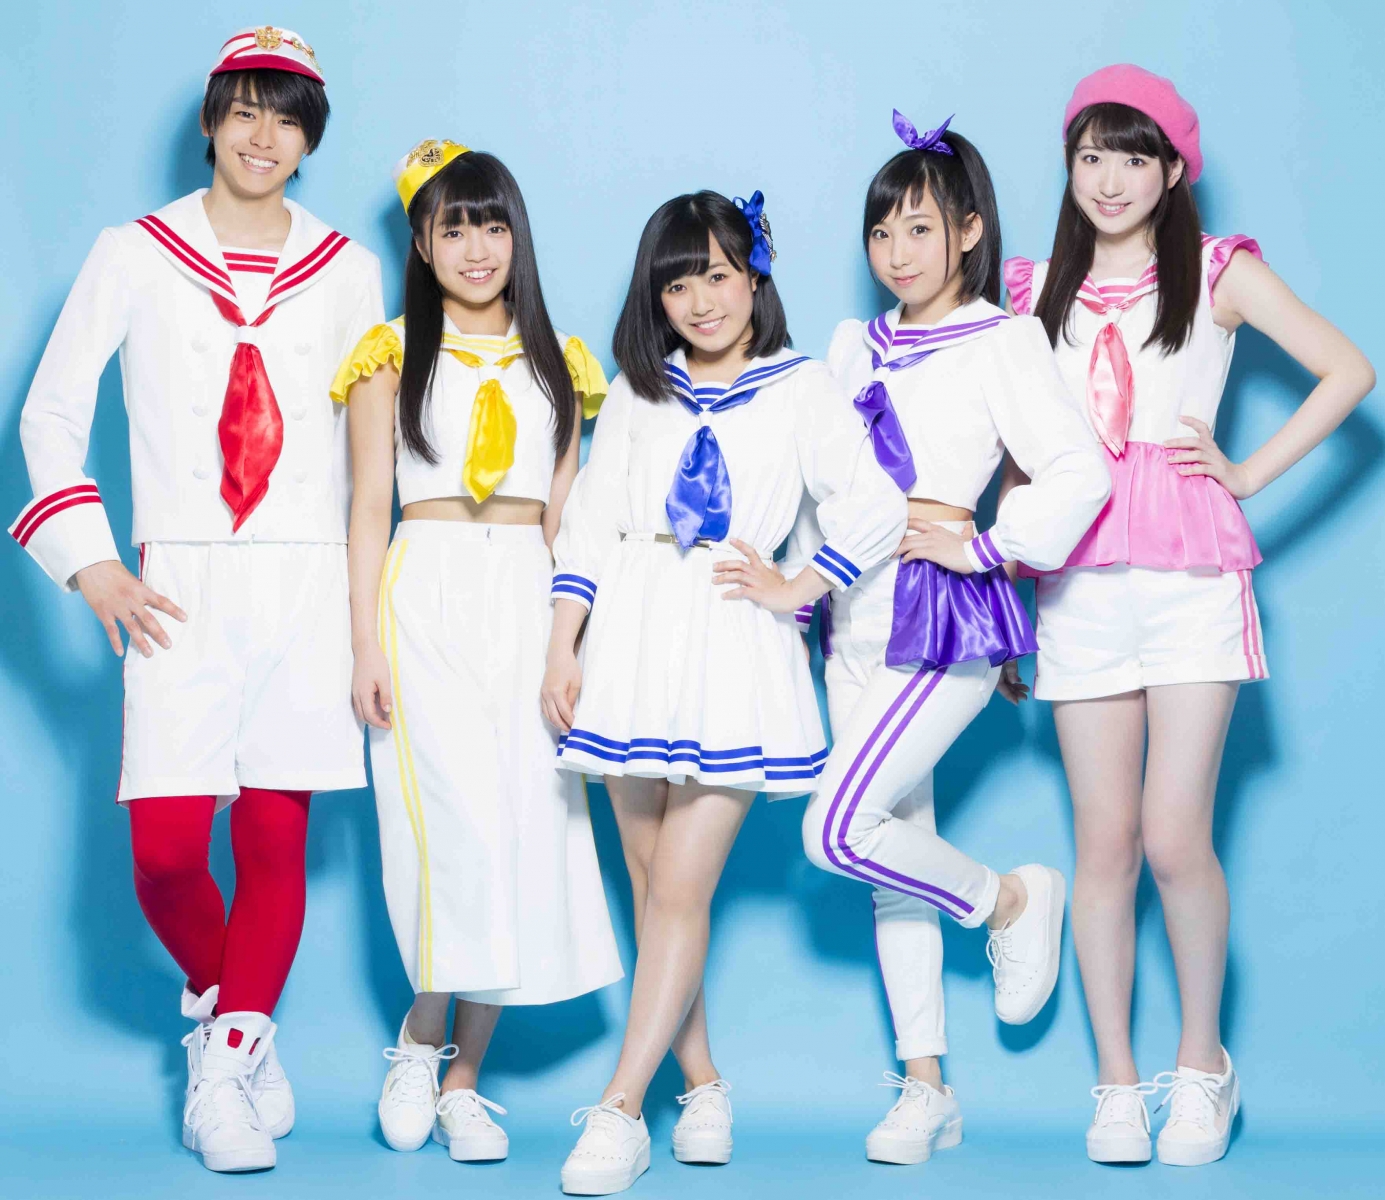 Watch-ch-chi! Dream5 Released New Dance Lecture Video, “Youkai Taiso The 2nd Verse”